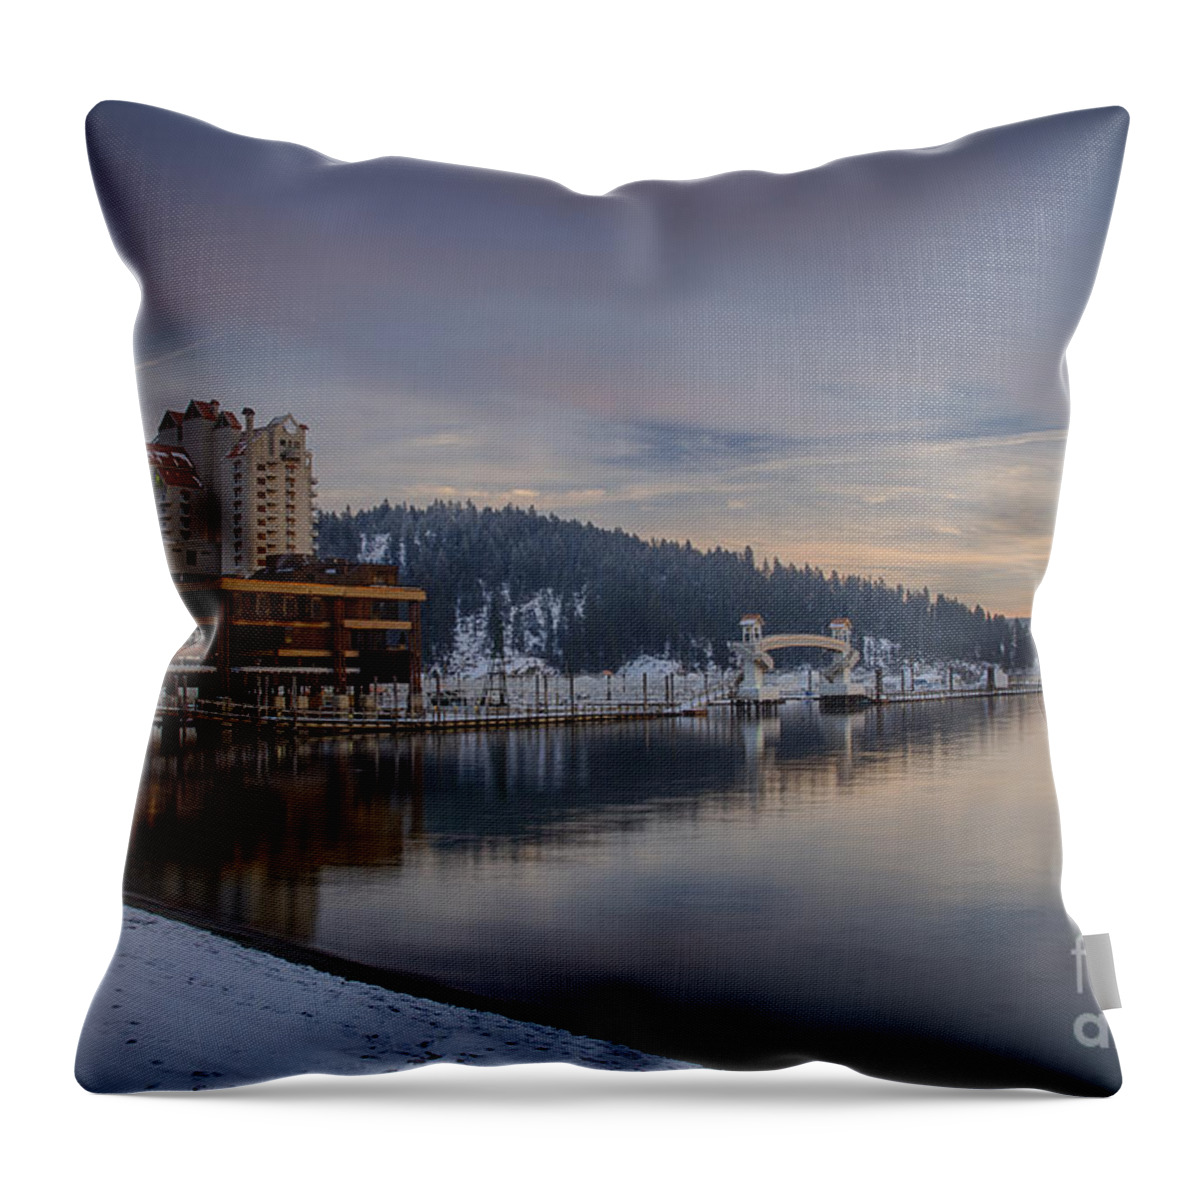 Coeur D'alene Lake Throw Pillow featuring the photograph Coeur d alene Twilight by Idaho Scenic Images Linda Lantzy